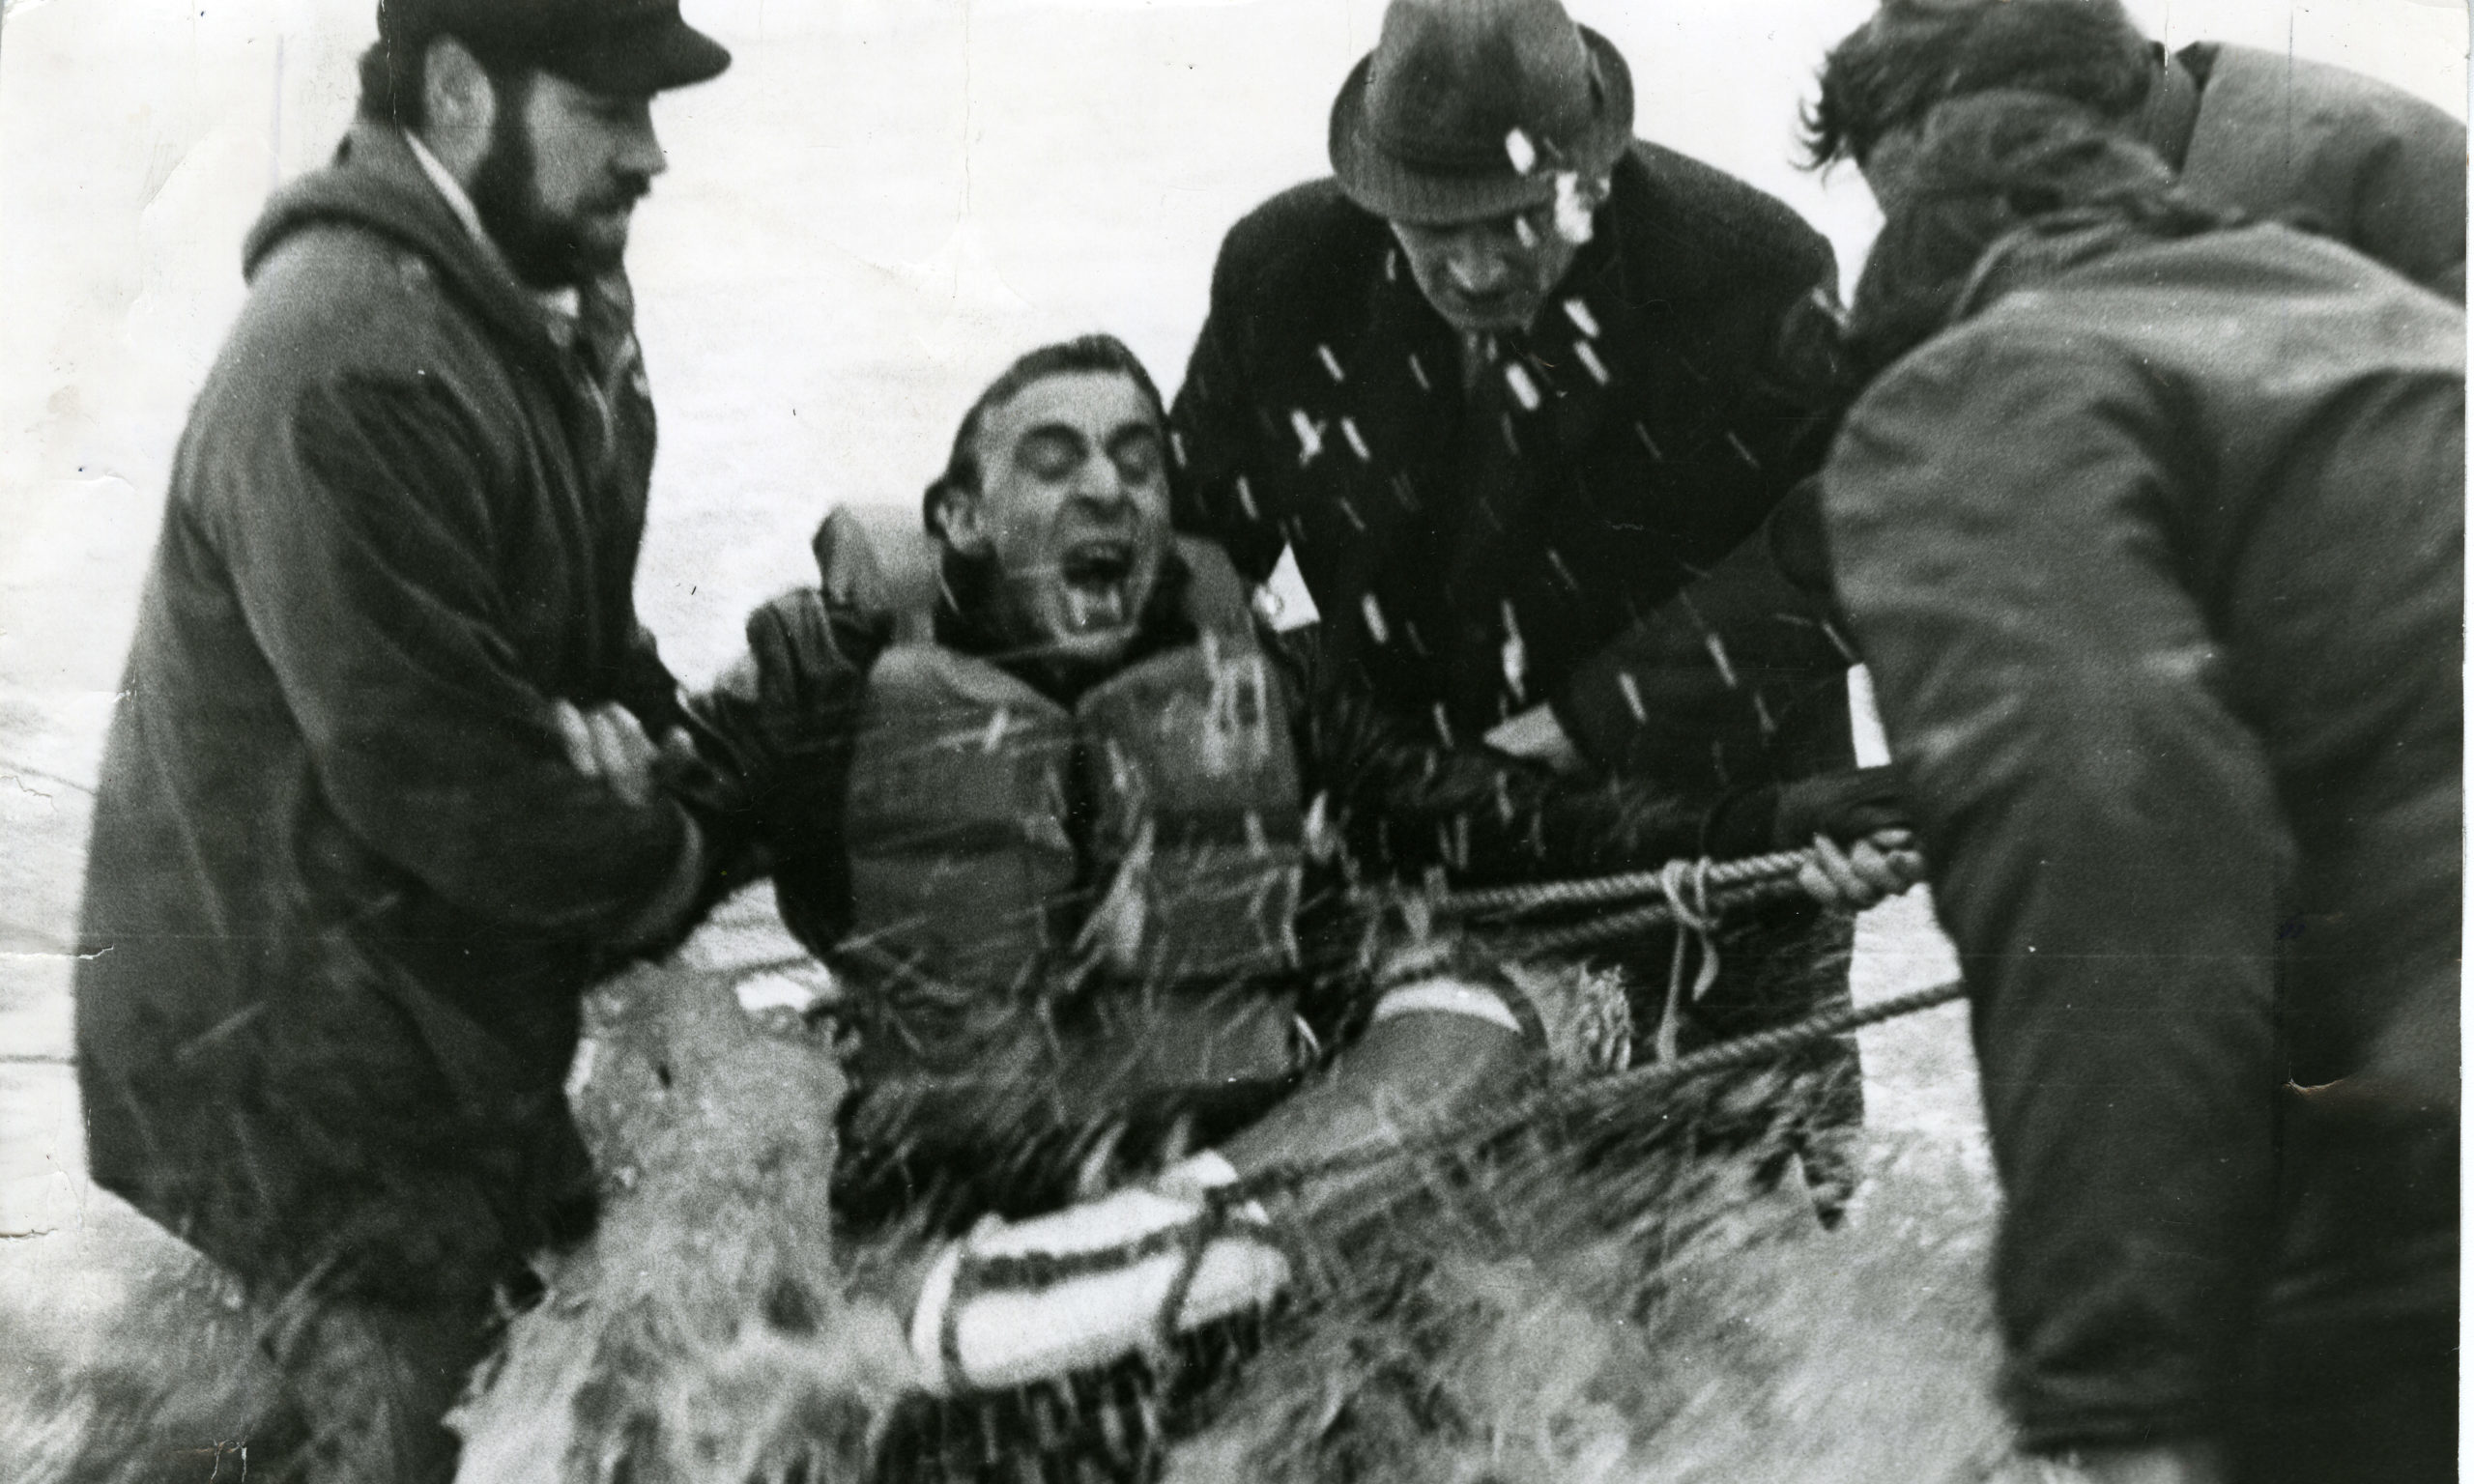 A crew member of the Polish trawler "Nurzec" screams in agony because of the freezing water as rescuers wade in to remove him from the Breeches Buoy off the Aberdeen coast.